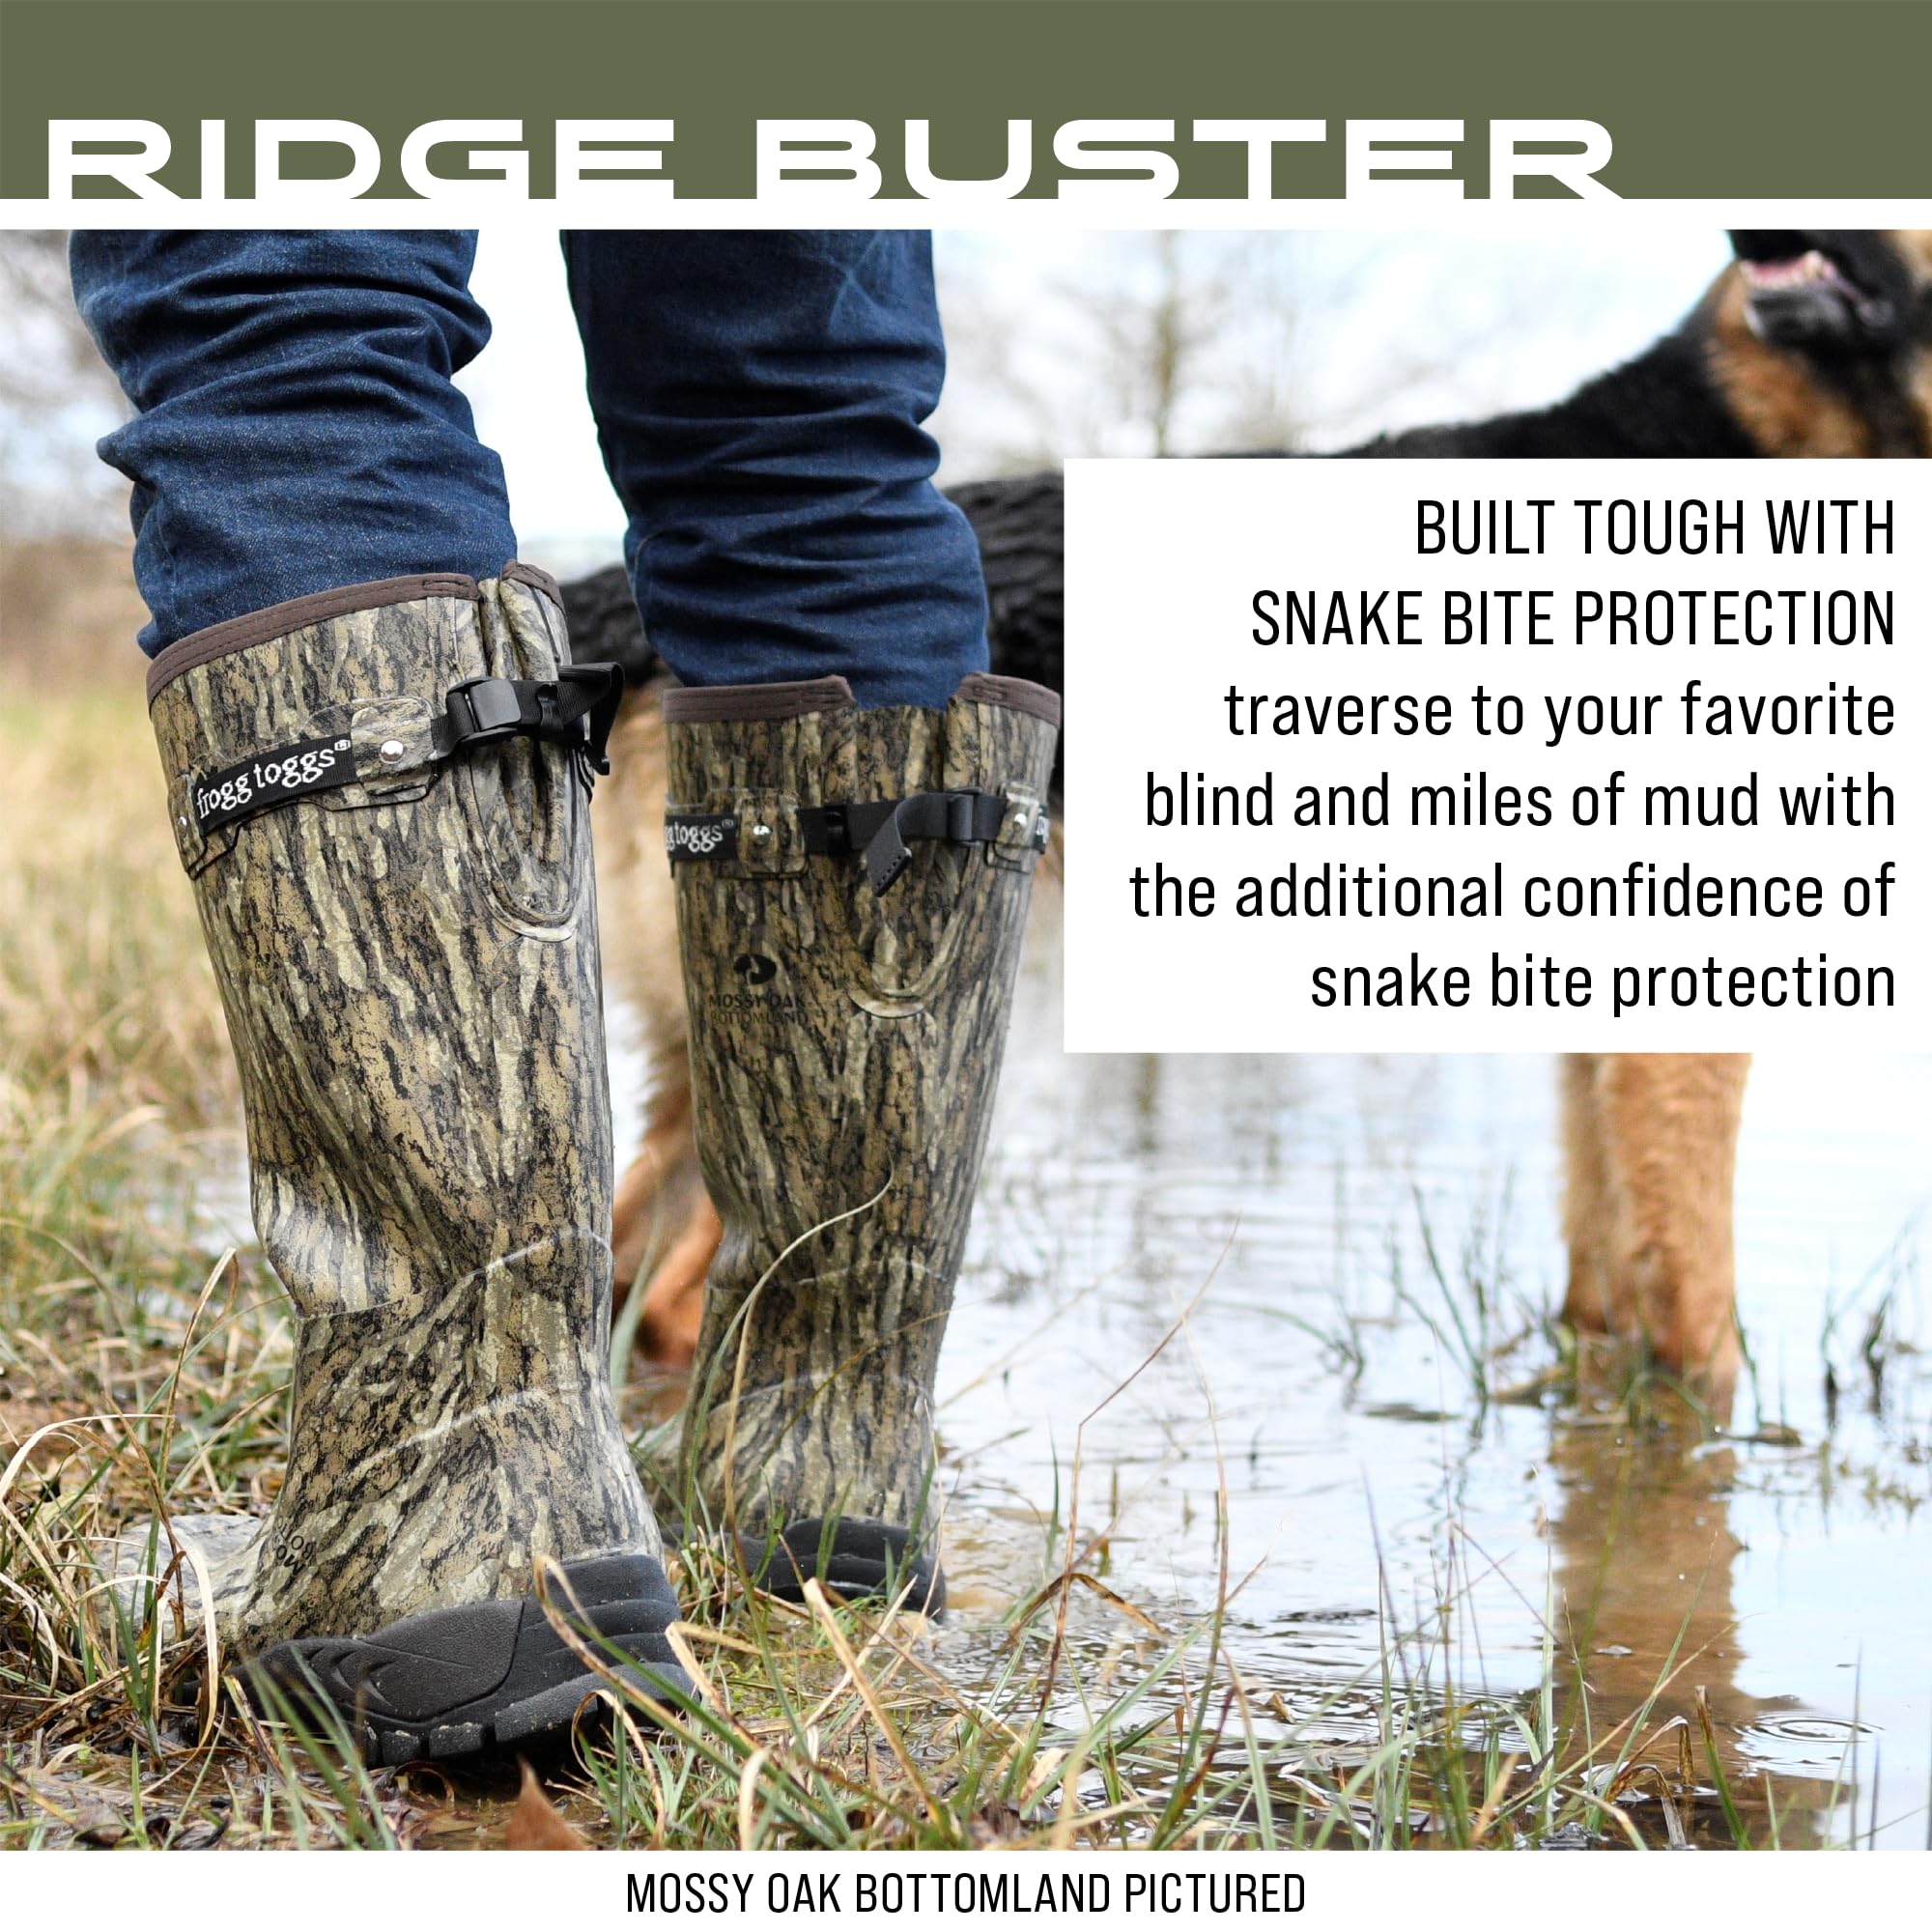 FROGG TOGGS Men's Ridge Buster, Snake Protection in a Rubber, Neoprene Waterproof Boot